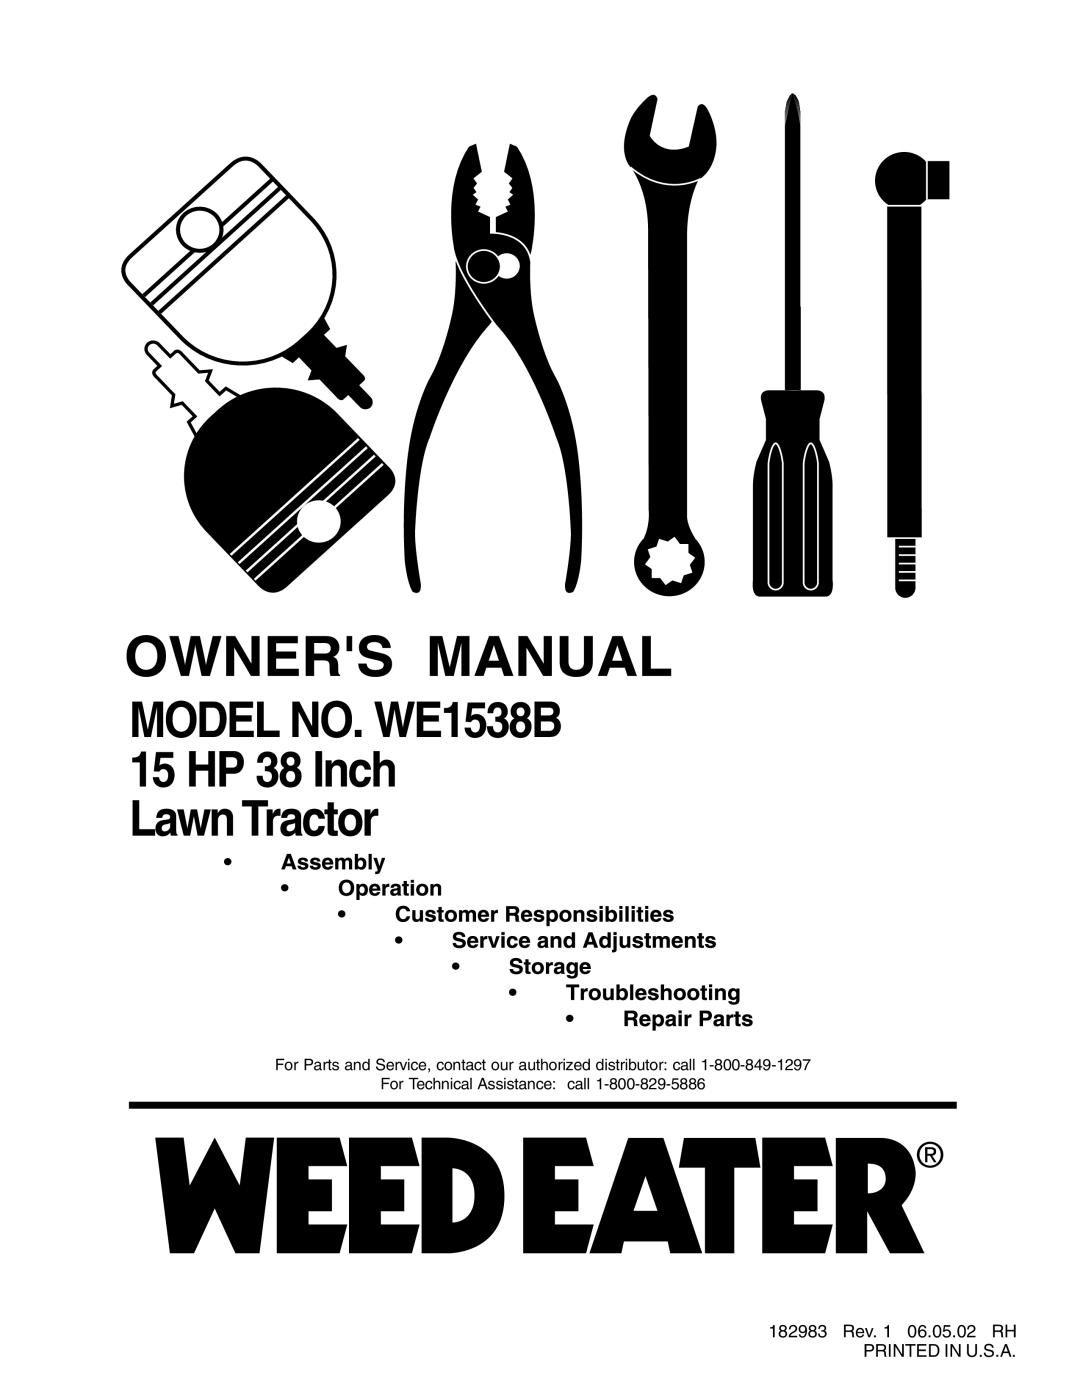 Weed Eater manual MODEL NO. WE1538B 15 HP 38 Inch Lawn Tractor, 182983 Rev. 1 06.05.02 RH PRINTED IN U.S.A 